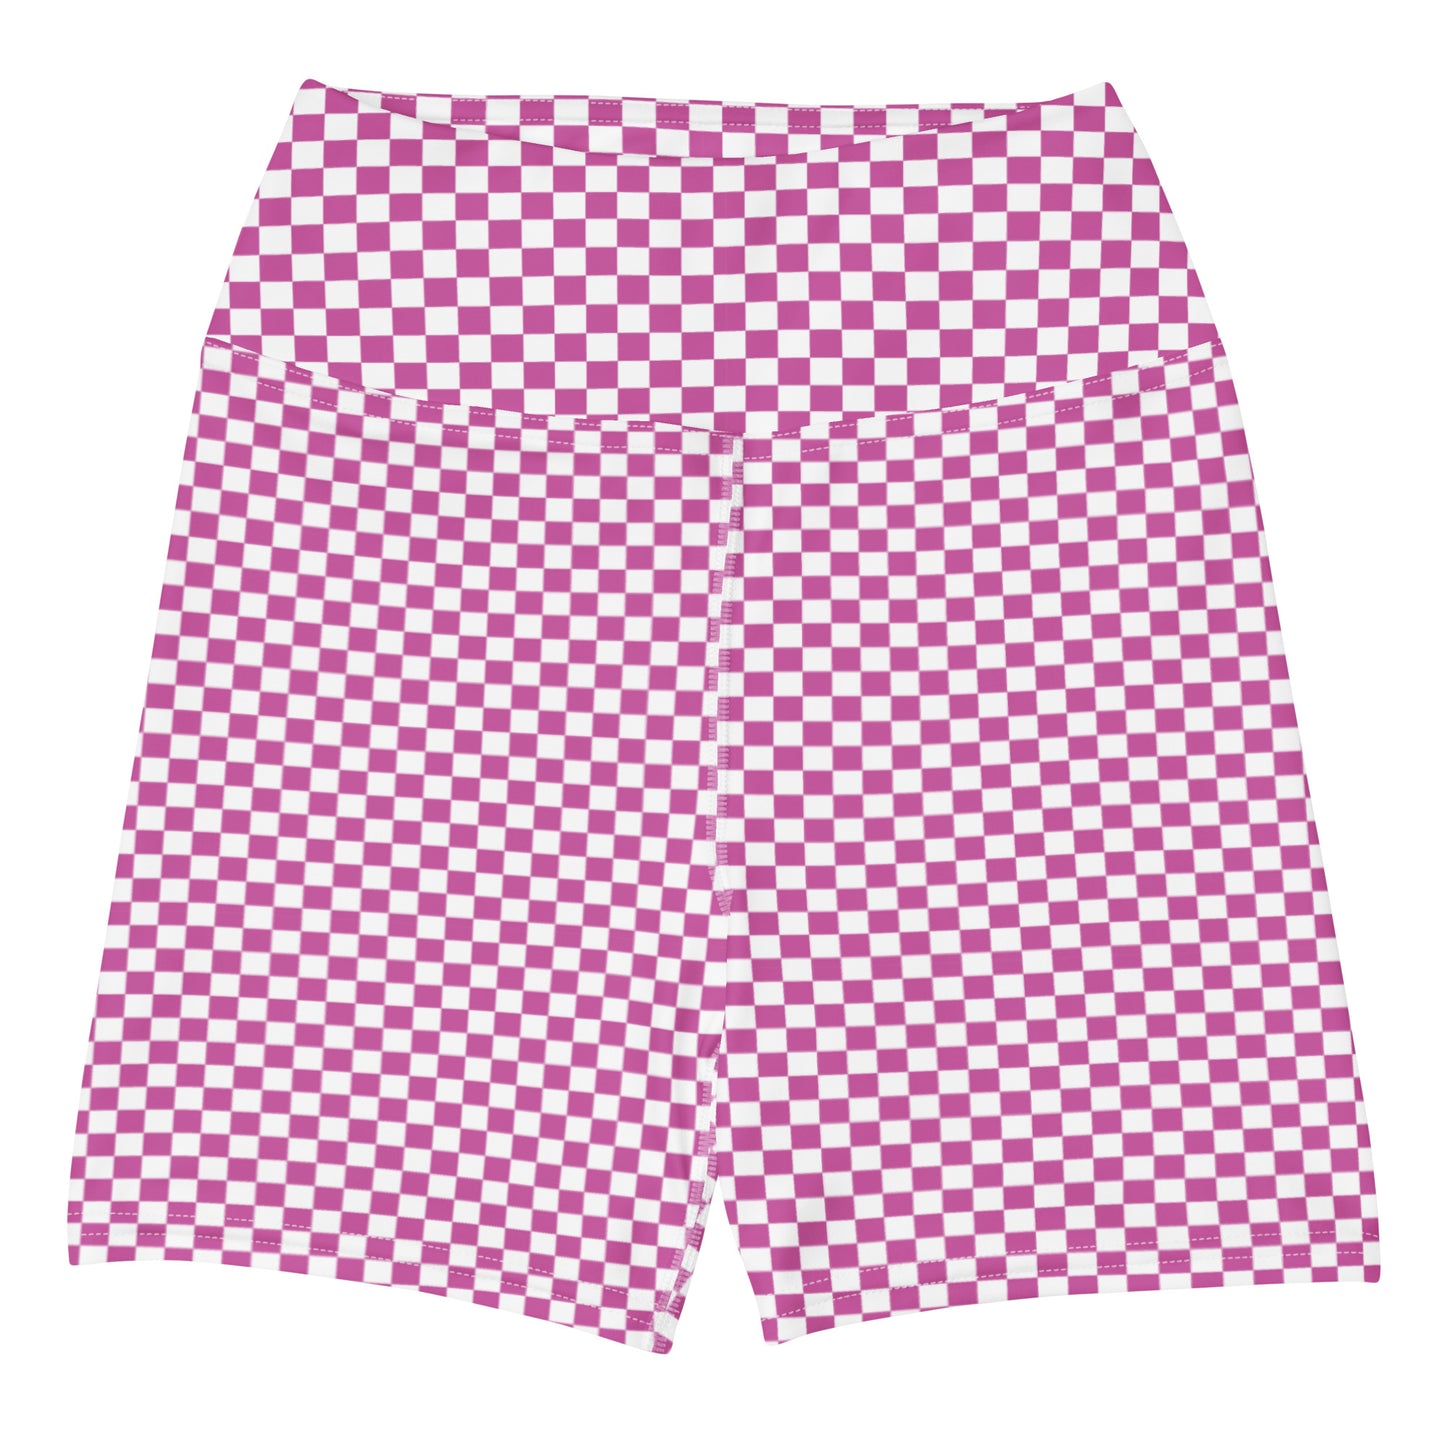 FYD Mini Yoga Shorts in pink & white check